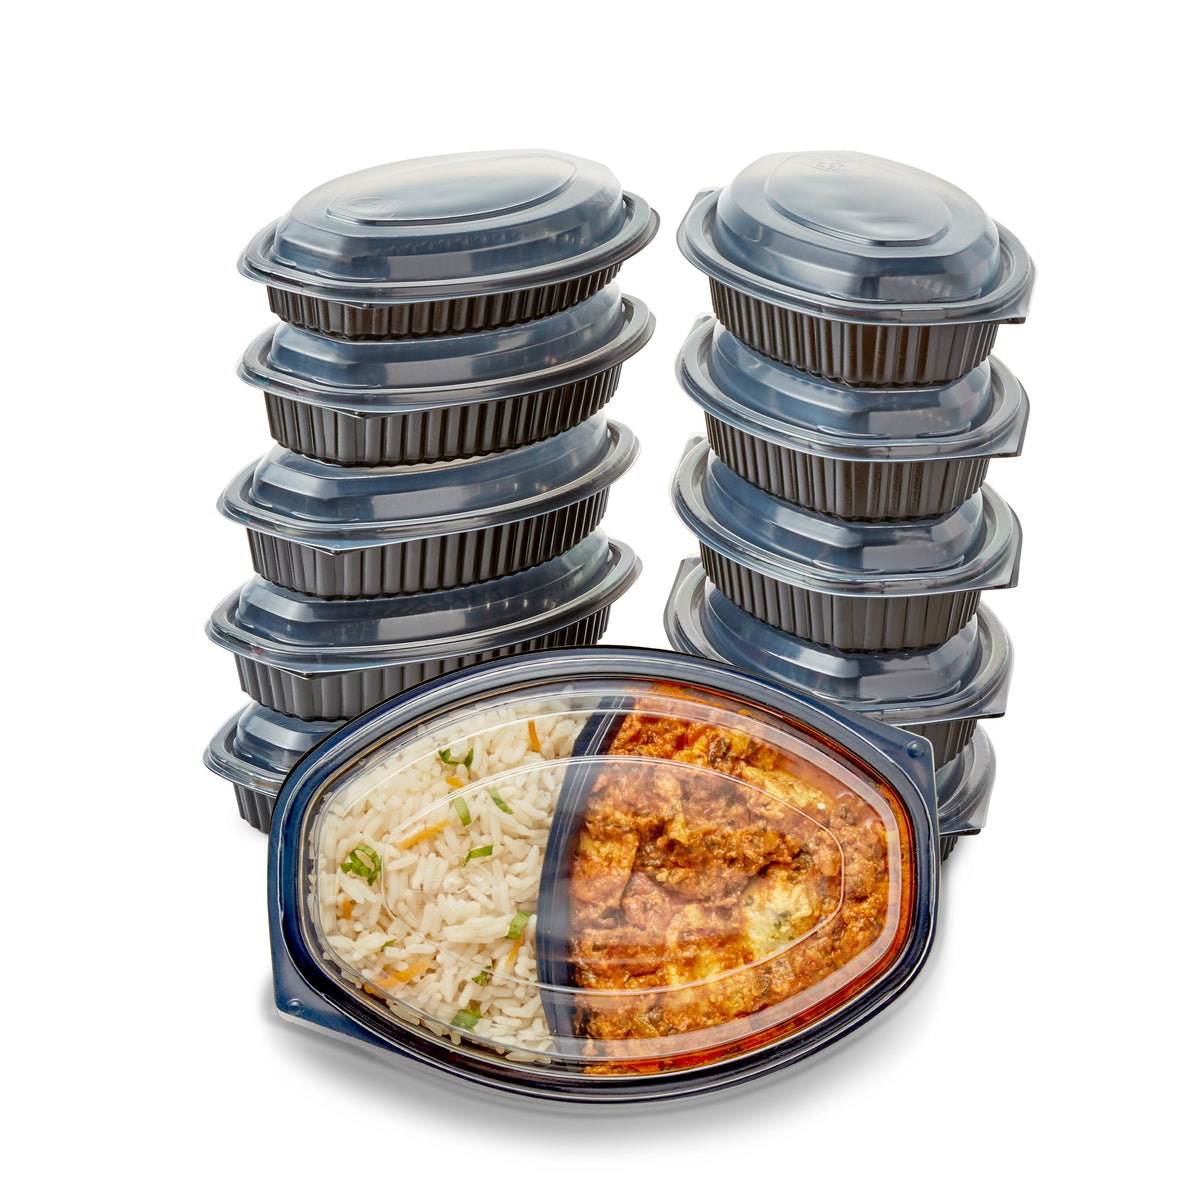 20 x 560 ml (19.8 ounce) Microwavable Twin Hot Food Meal Prep Trays & Lids (207mm x 143mm x 59mm)